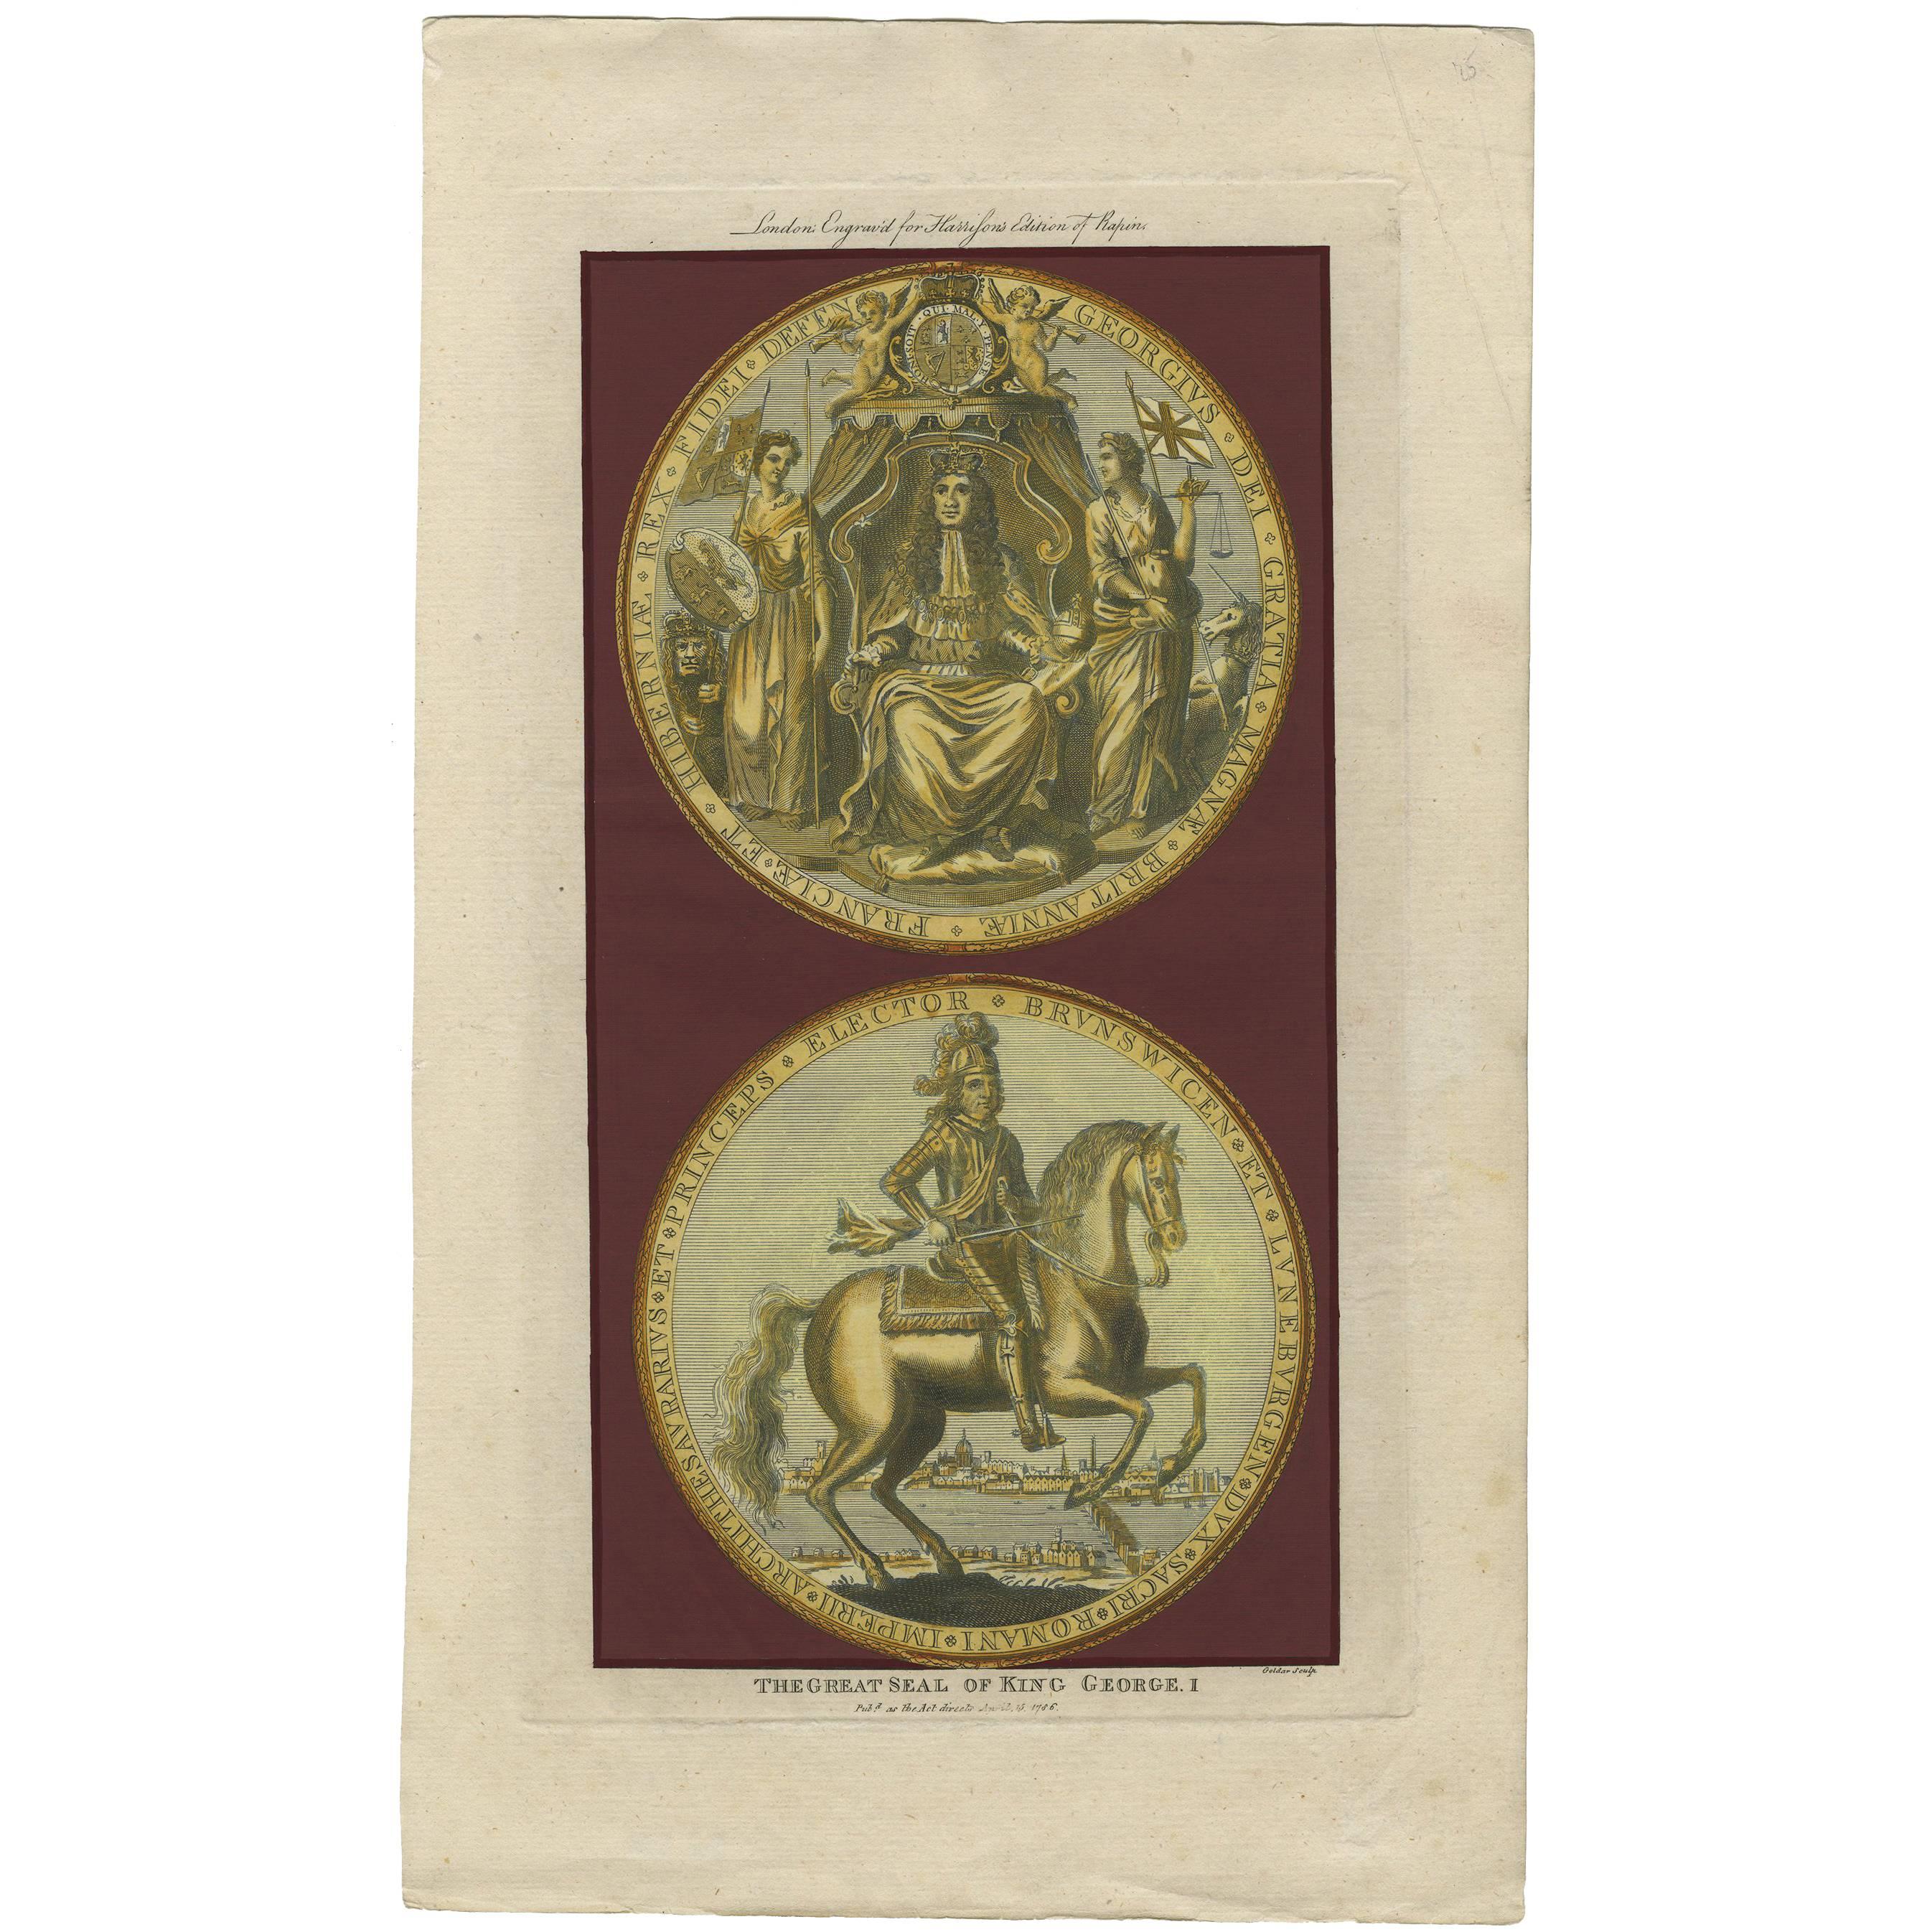 Antique Print of the Great Seal of King George I by Harrison (1789)